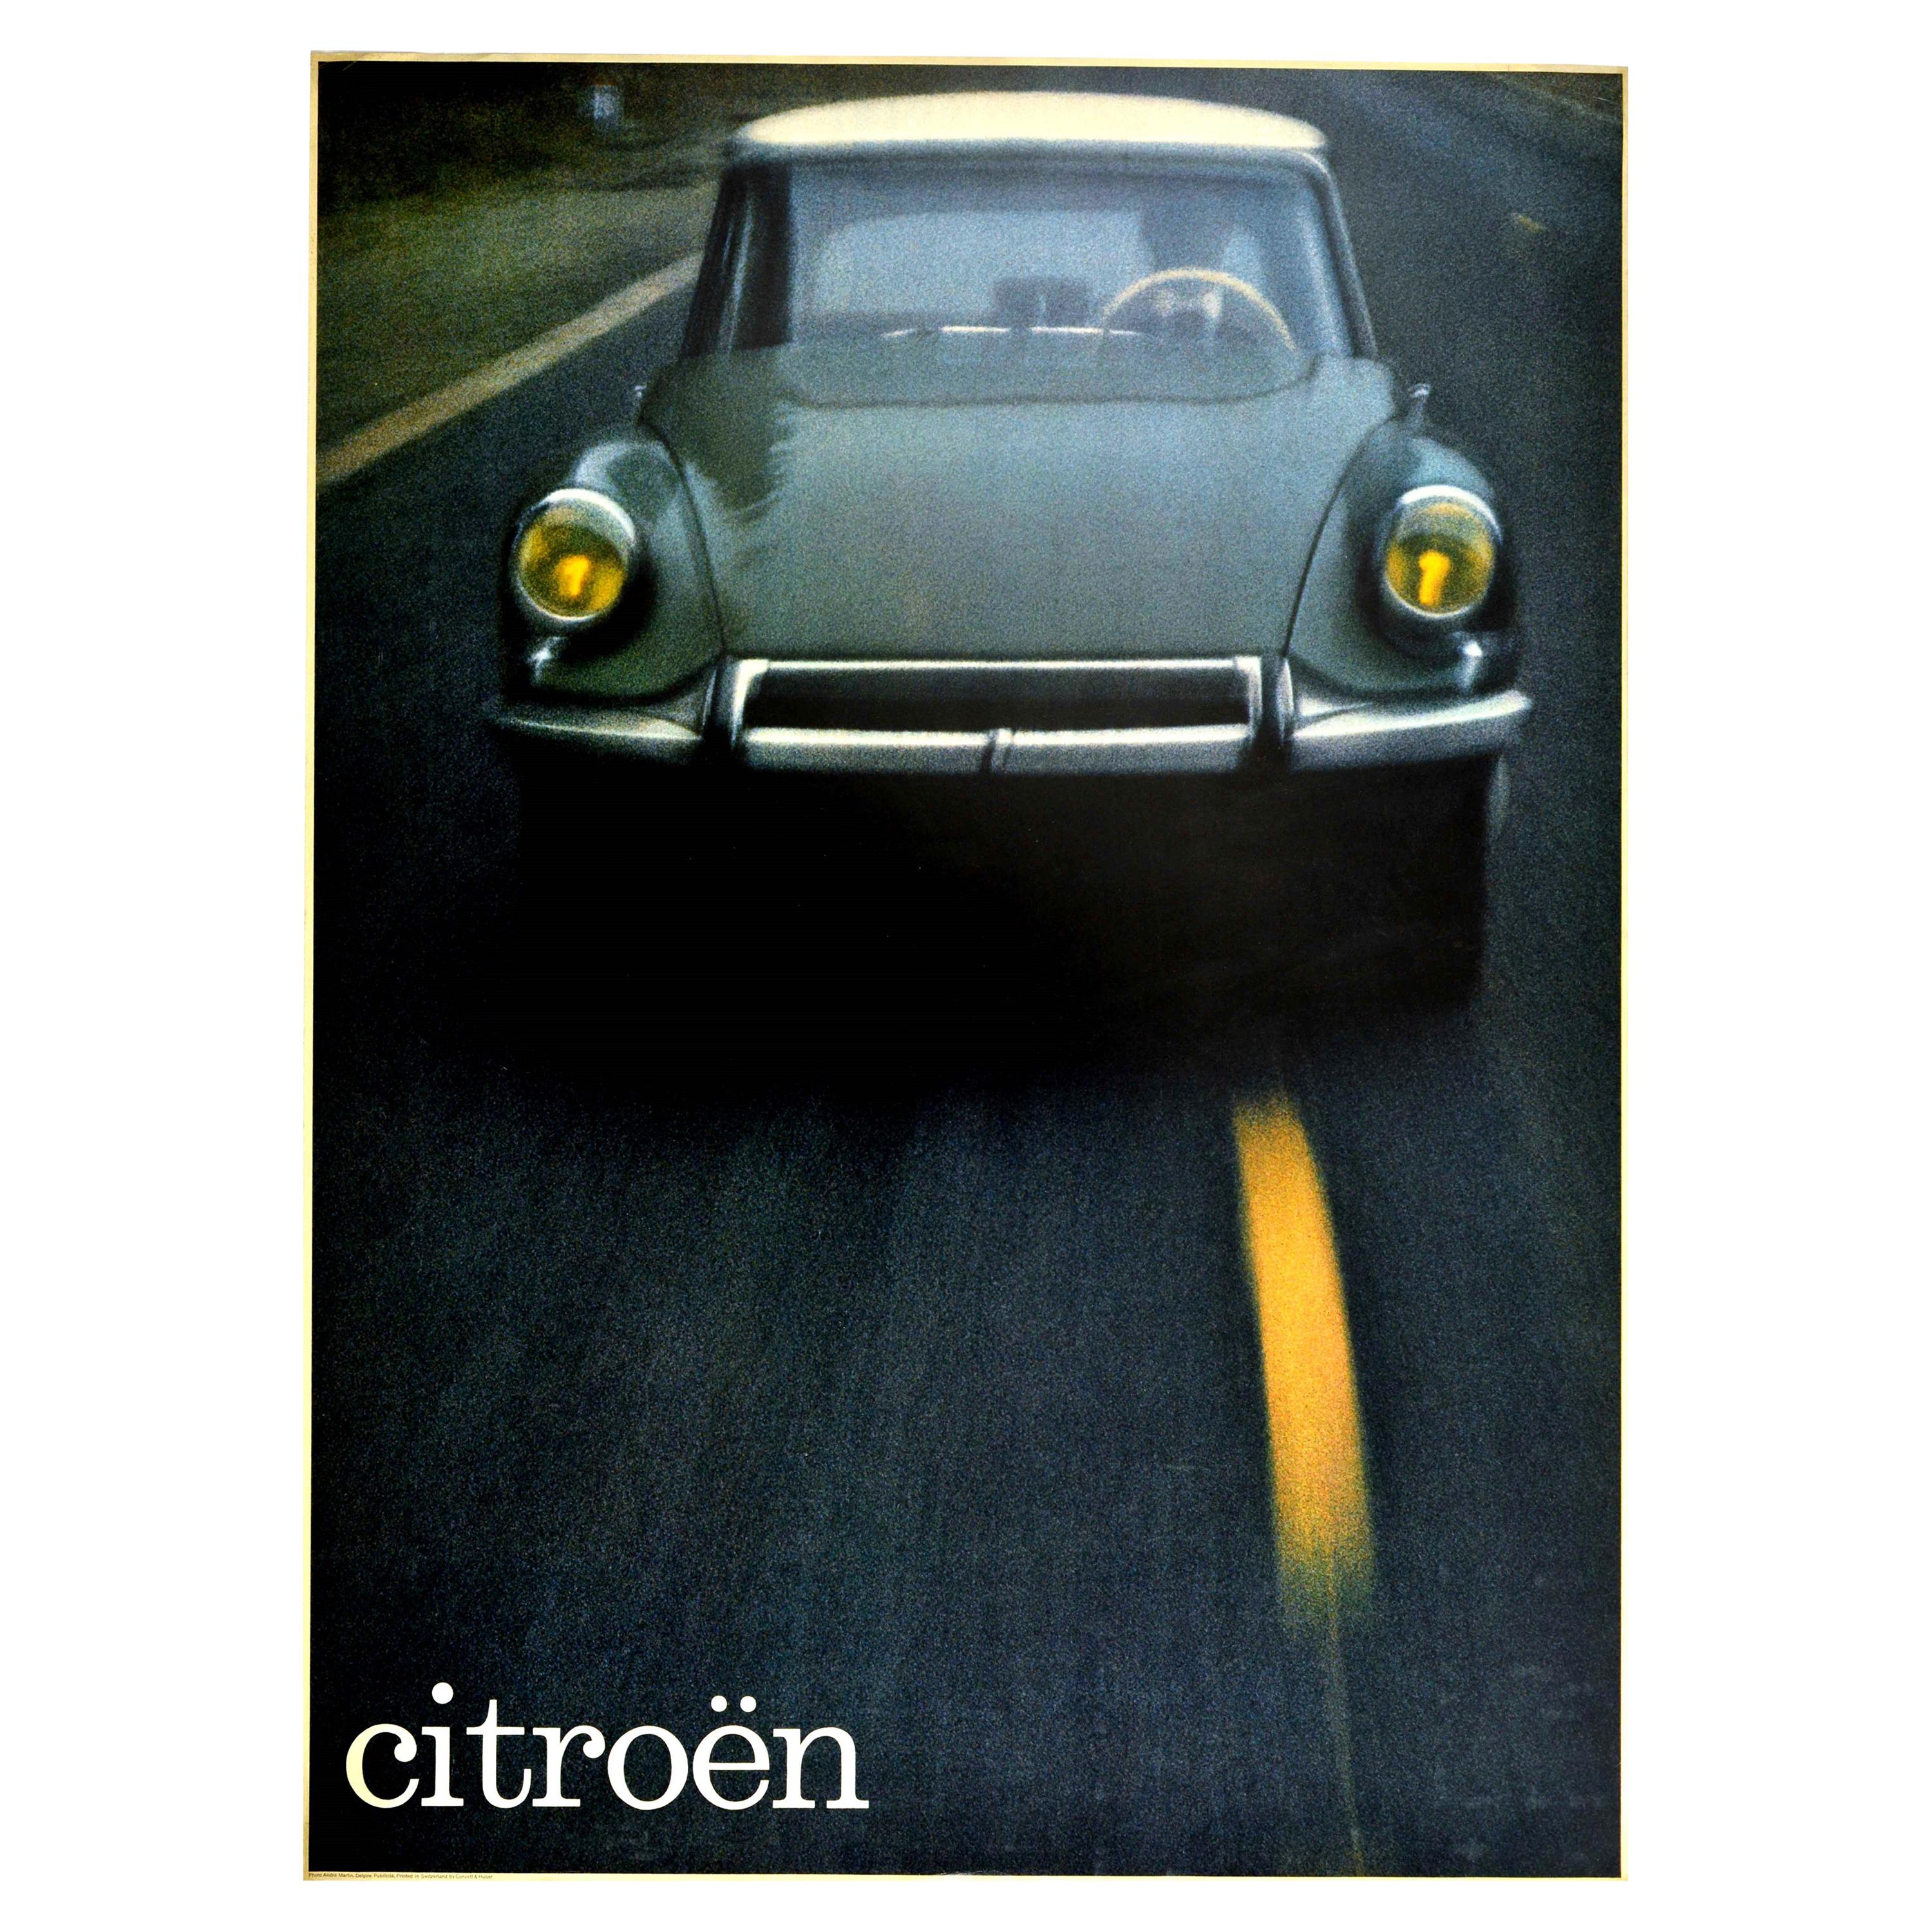 Photo Picture Poster Print Art A0 to A4 CAR POSTER CITROEN CAR 10 AD244 